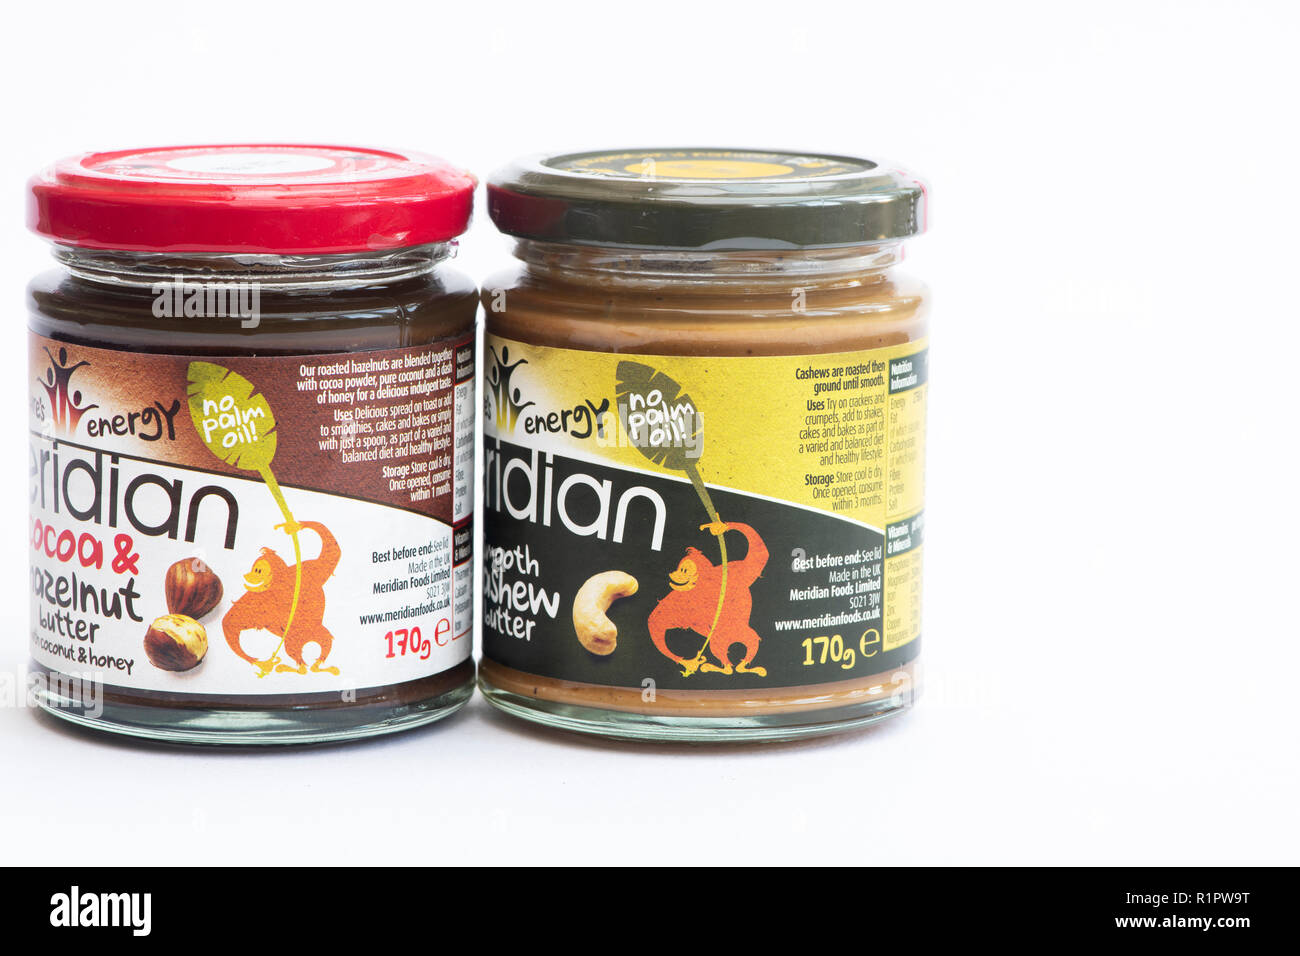 Meridian nut butter jars with No palm oil label Stock Photo